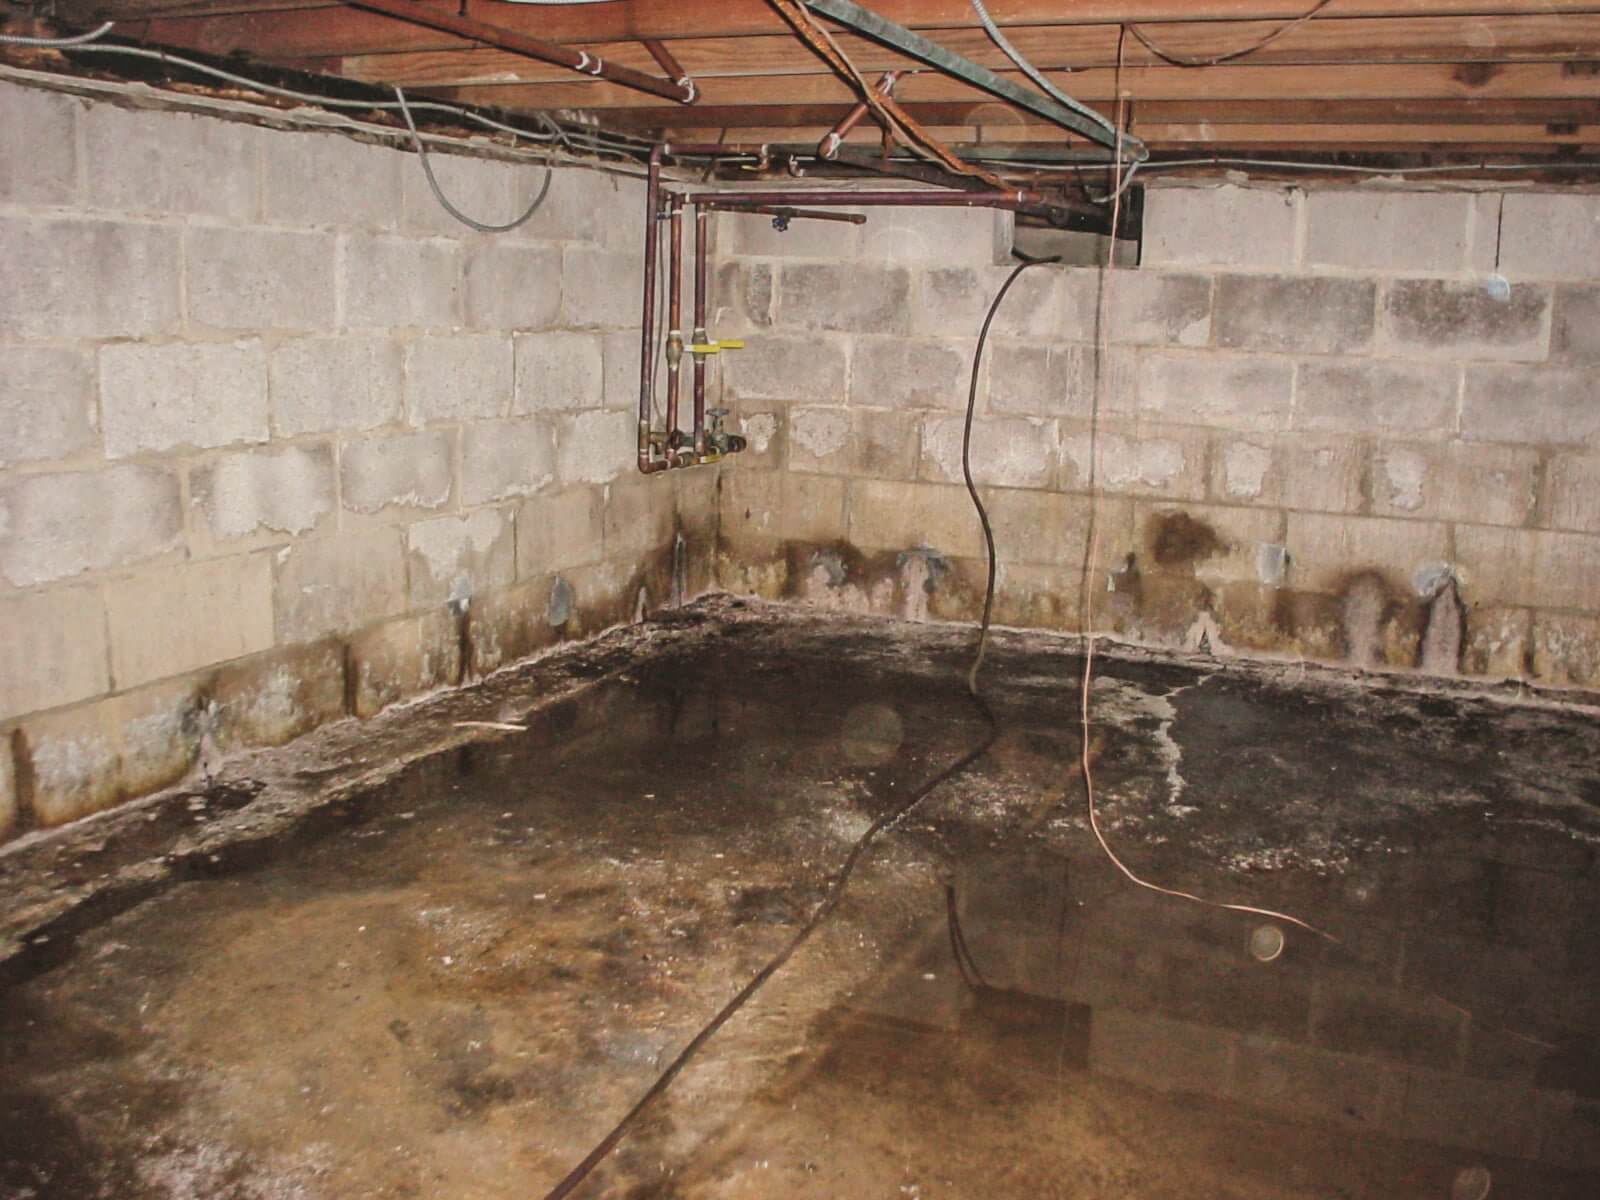 How can I get rid of the damp basement smell